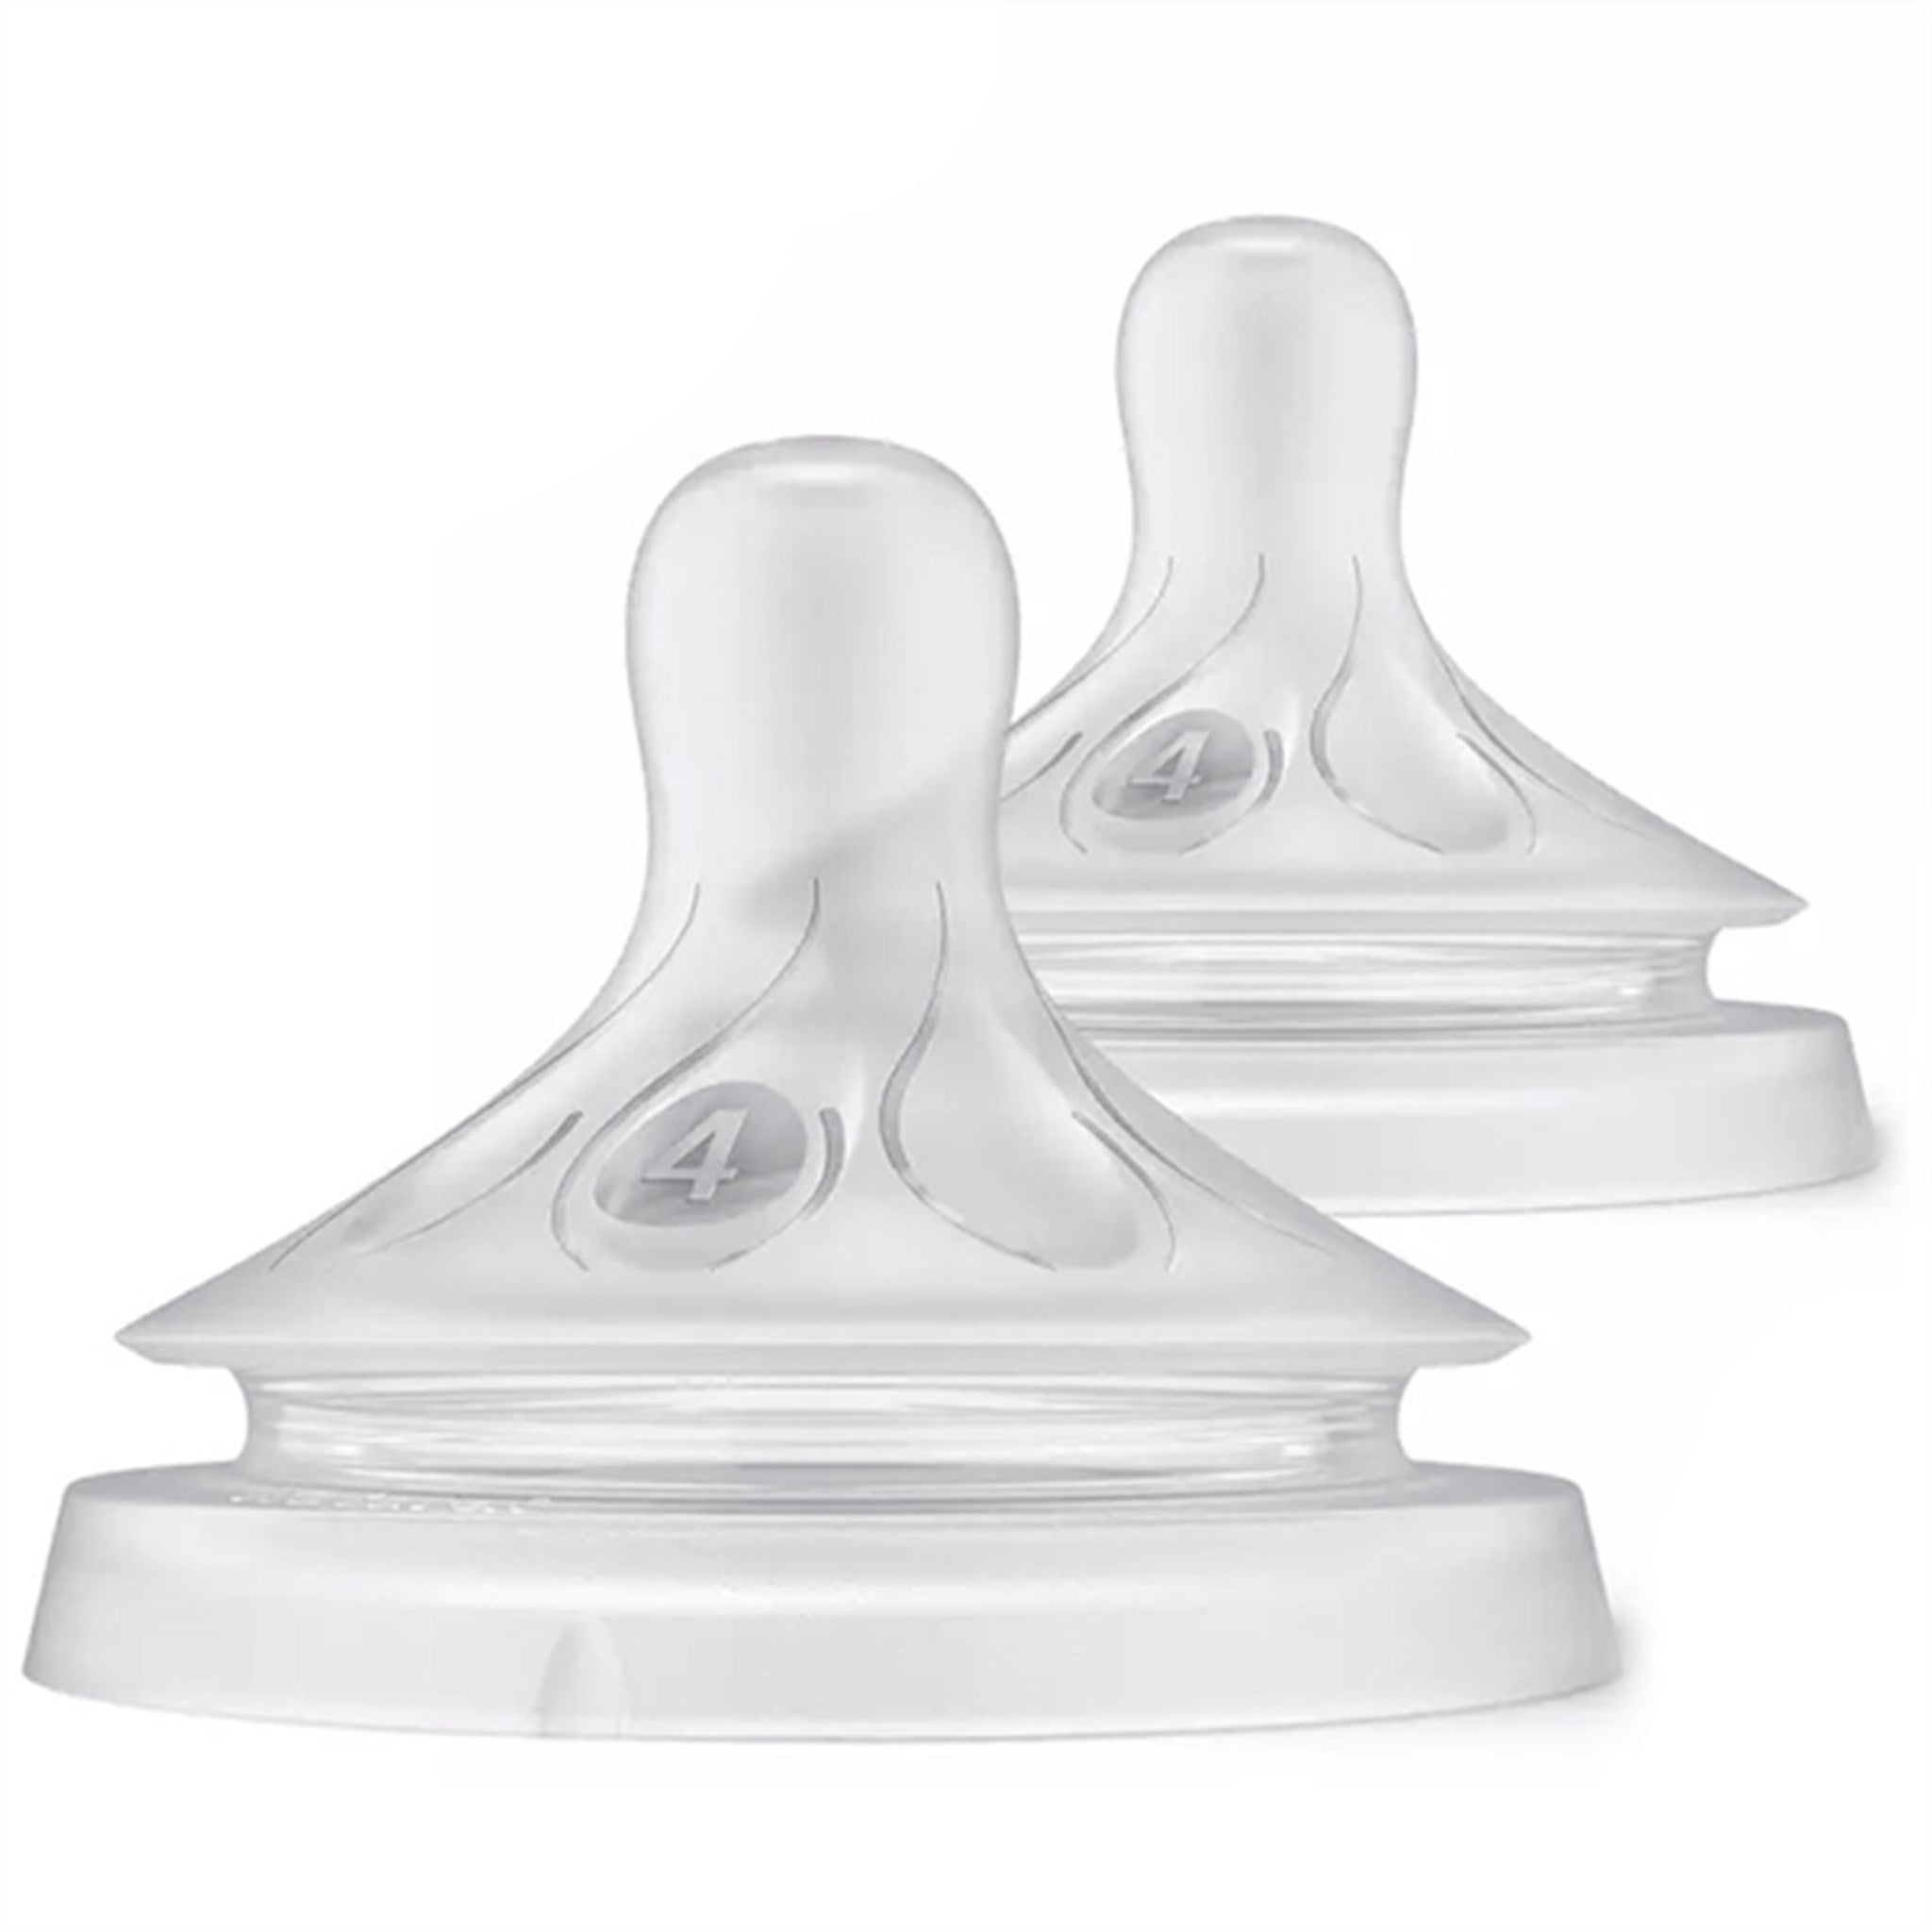 Philips Avent Natural Feeding Bottle Heads Response 3 months 2-pack